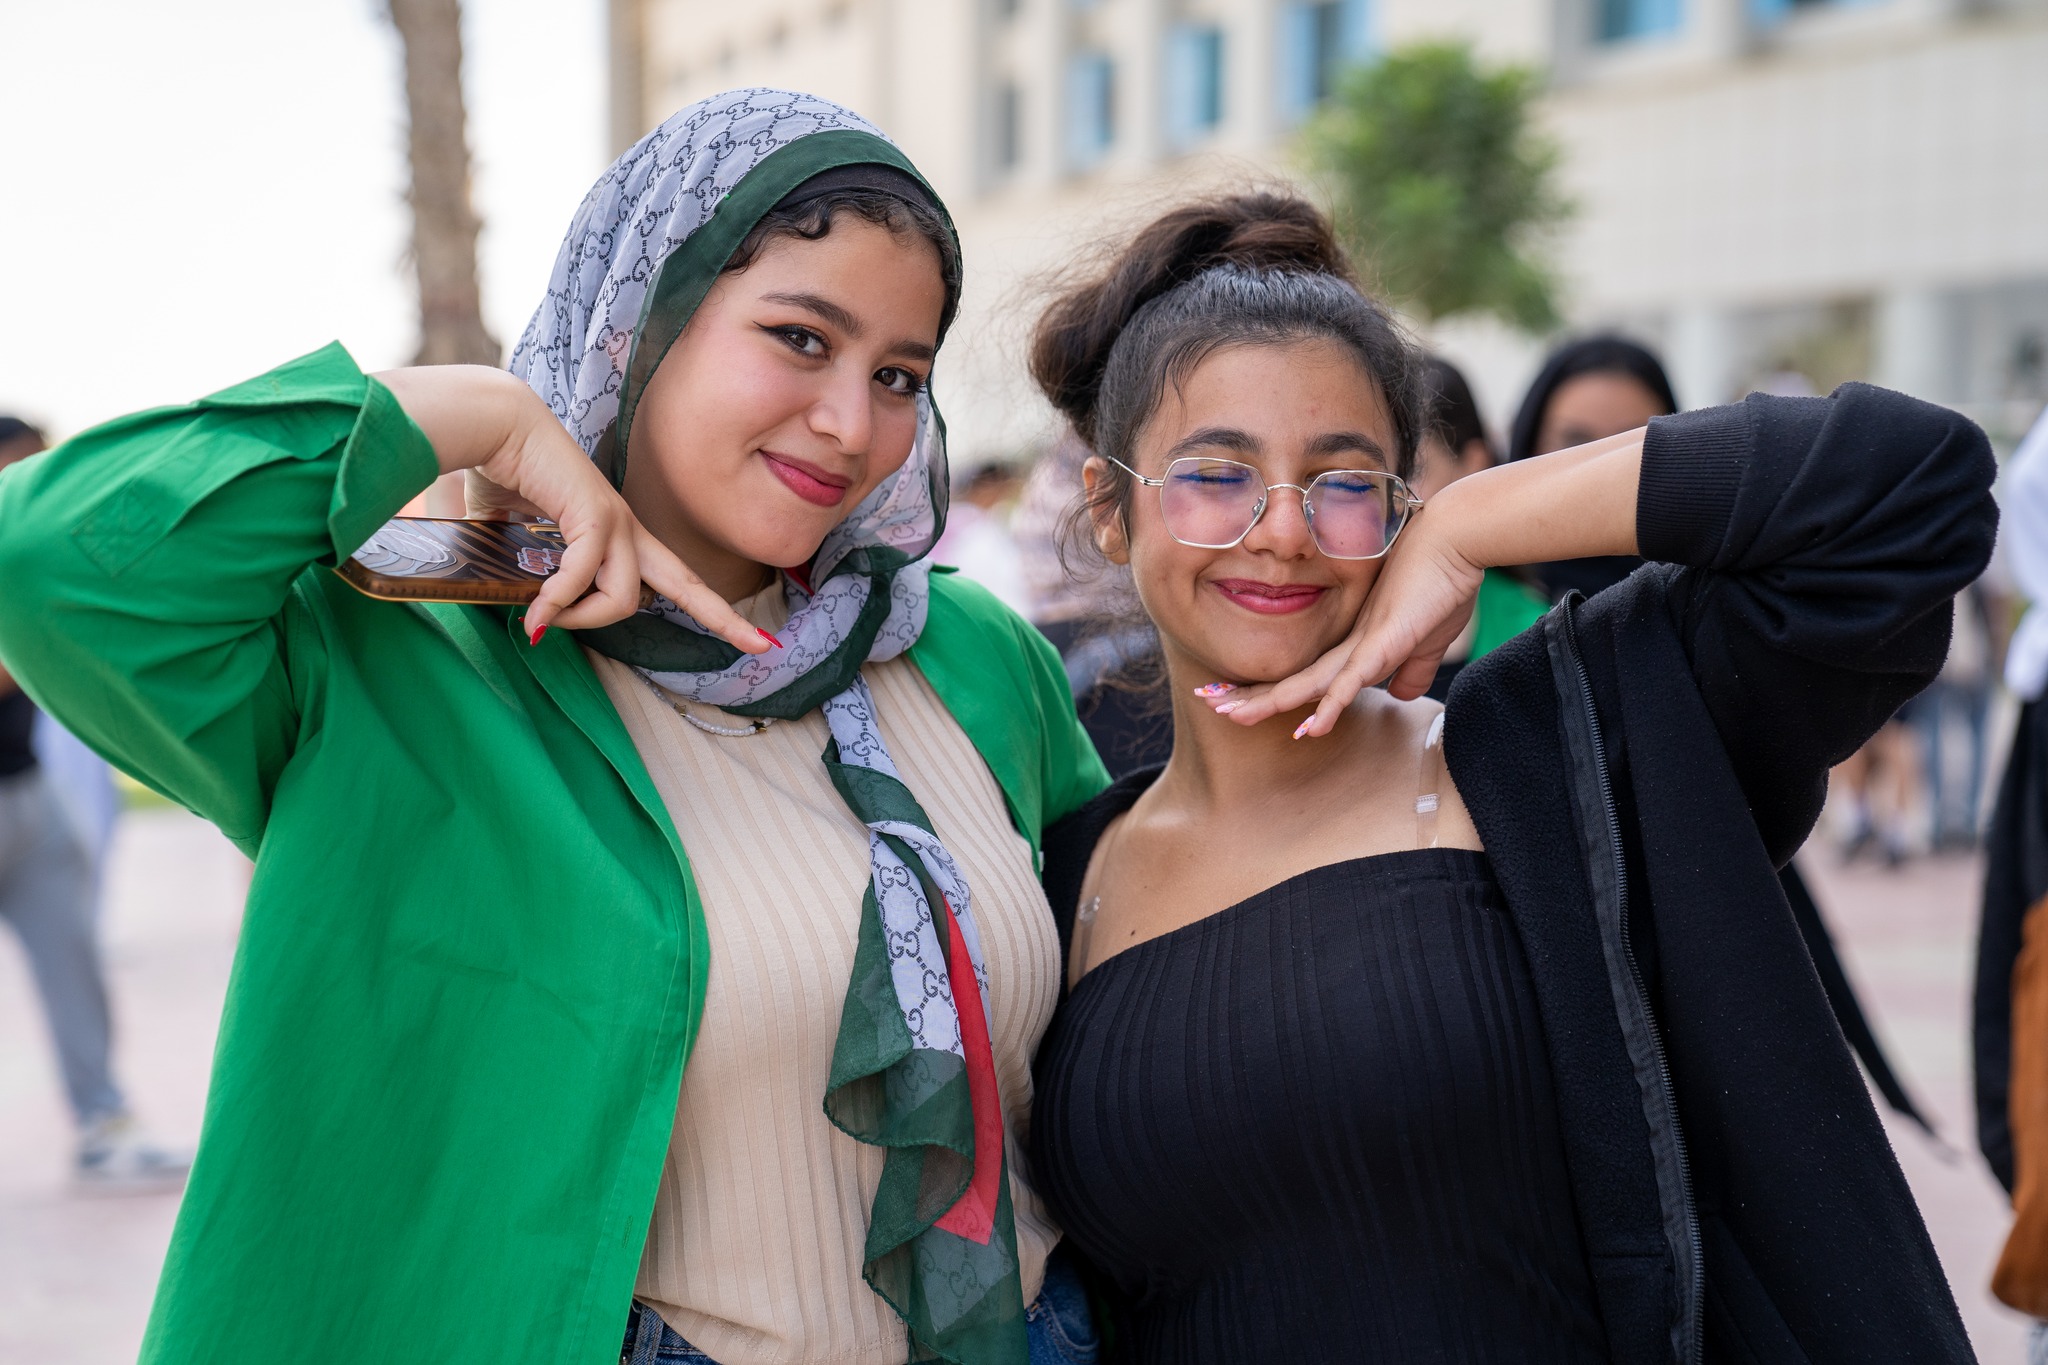 Nile University's Club Festival was an Unforgettable day